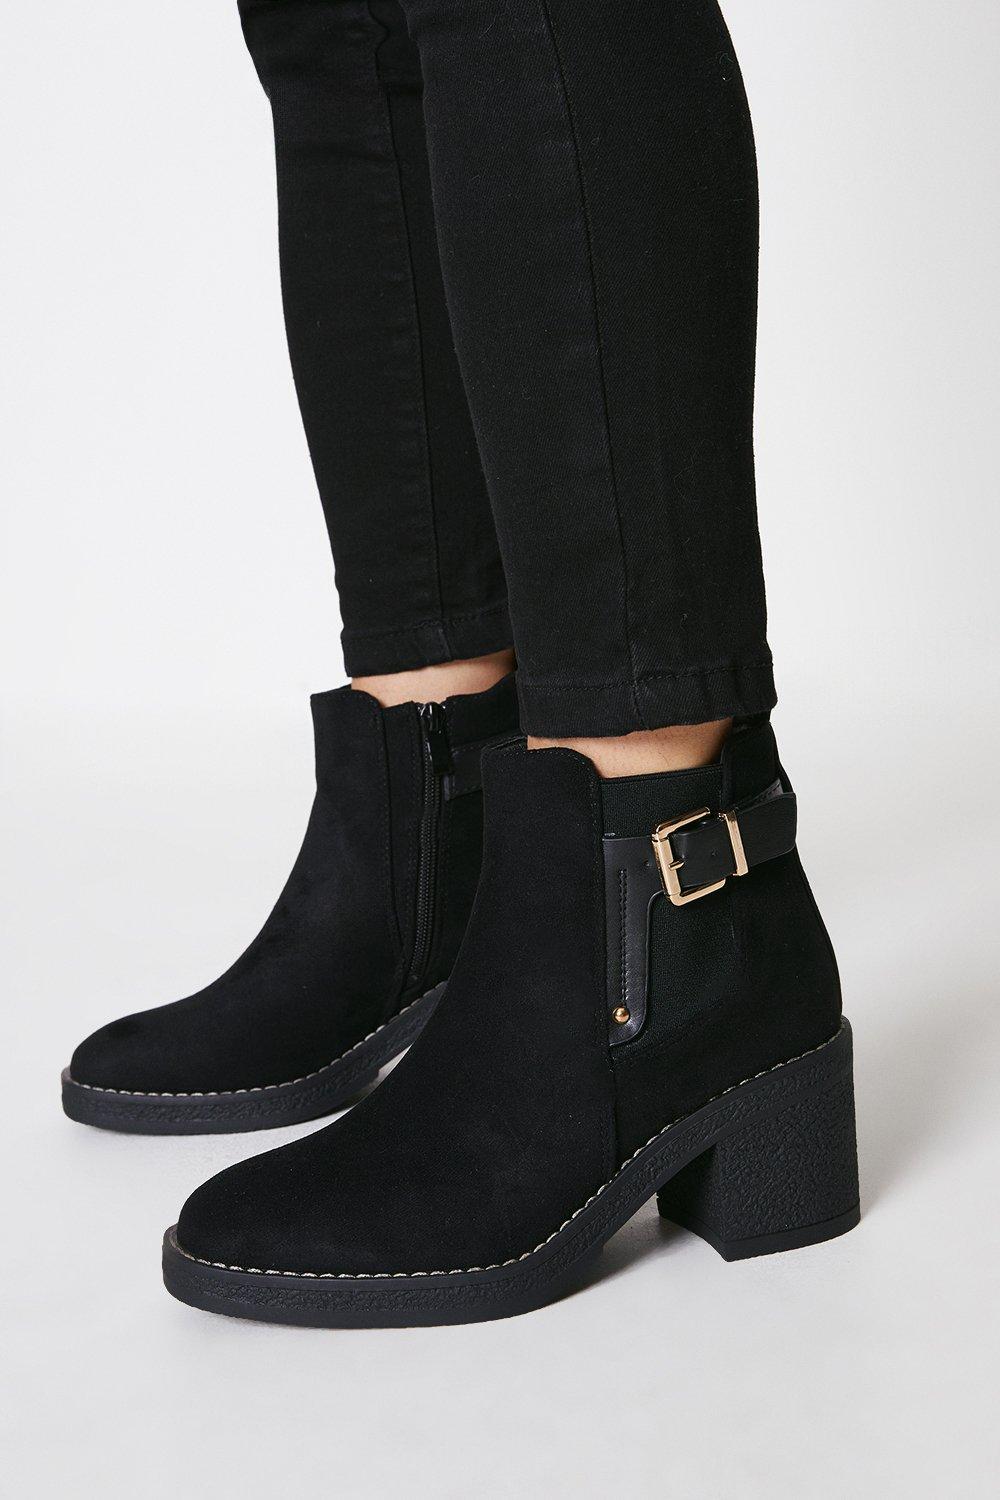 Women’s Armour Buckle Mid Heel Ankle Boots - black - 5